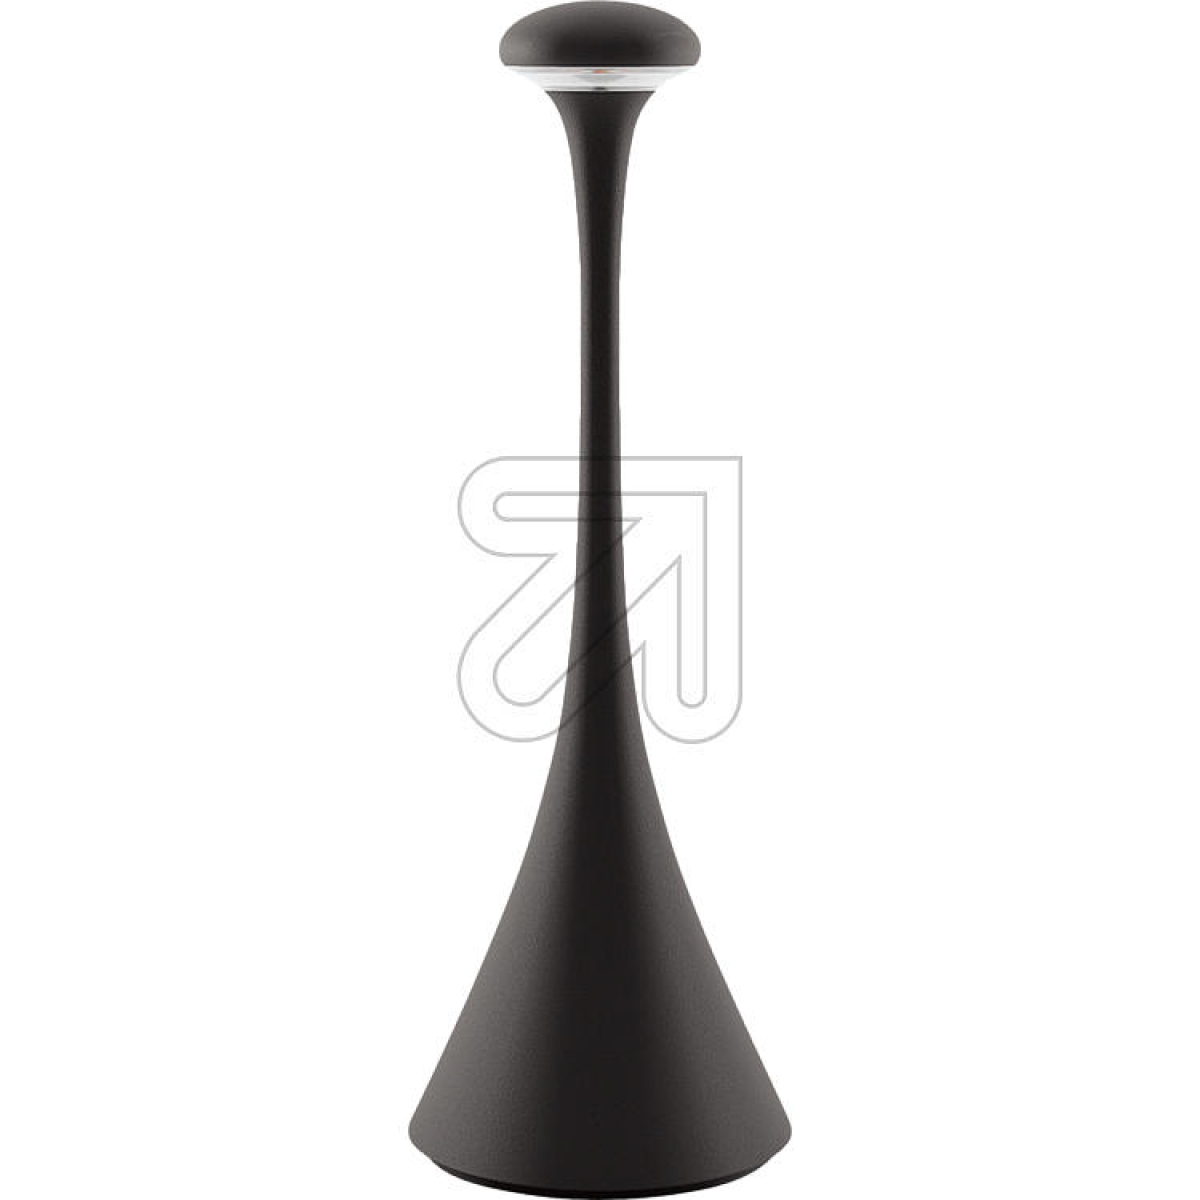 SIGORLED battery-powered table lamp Nudrop night black 4540101Article-No: 644150